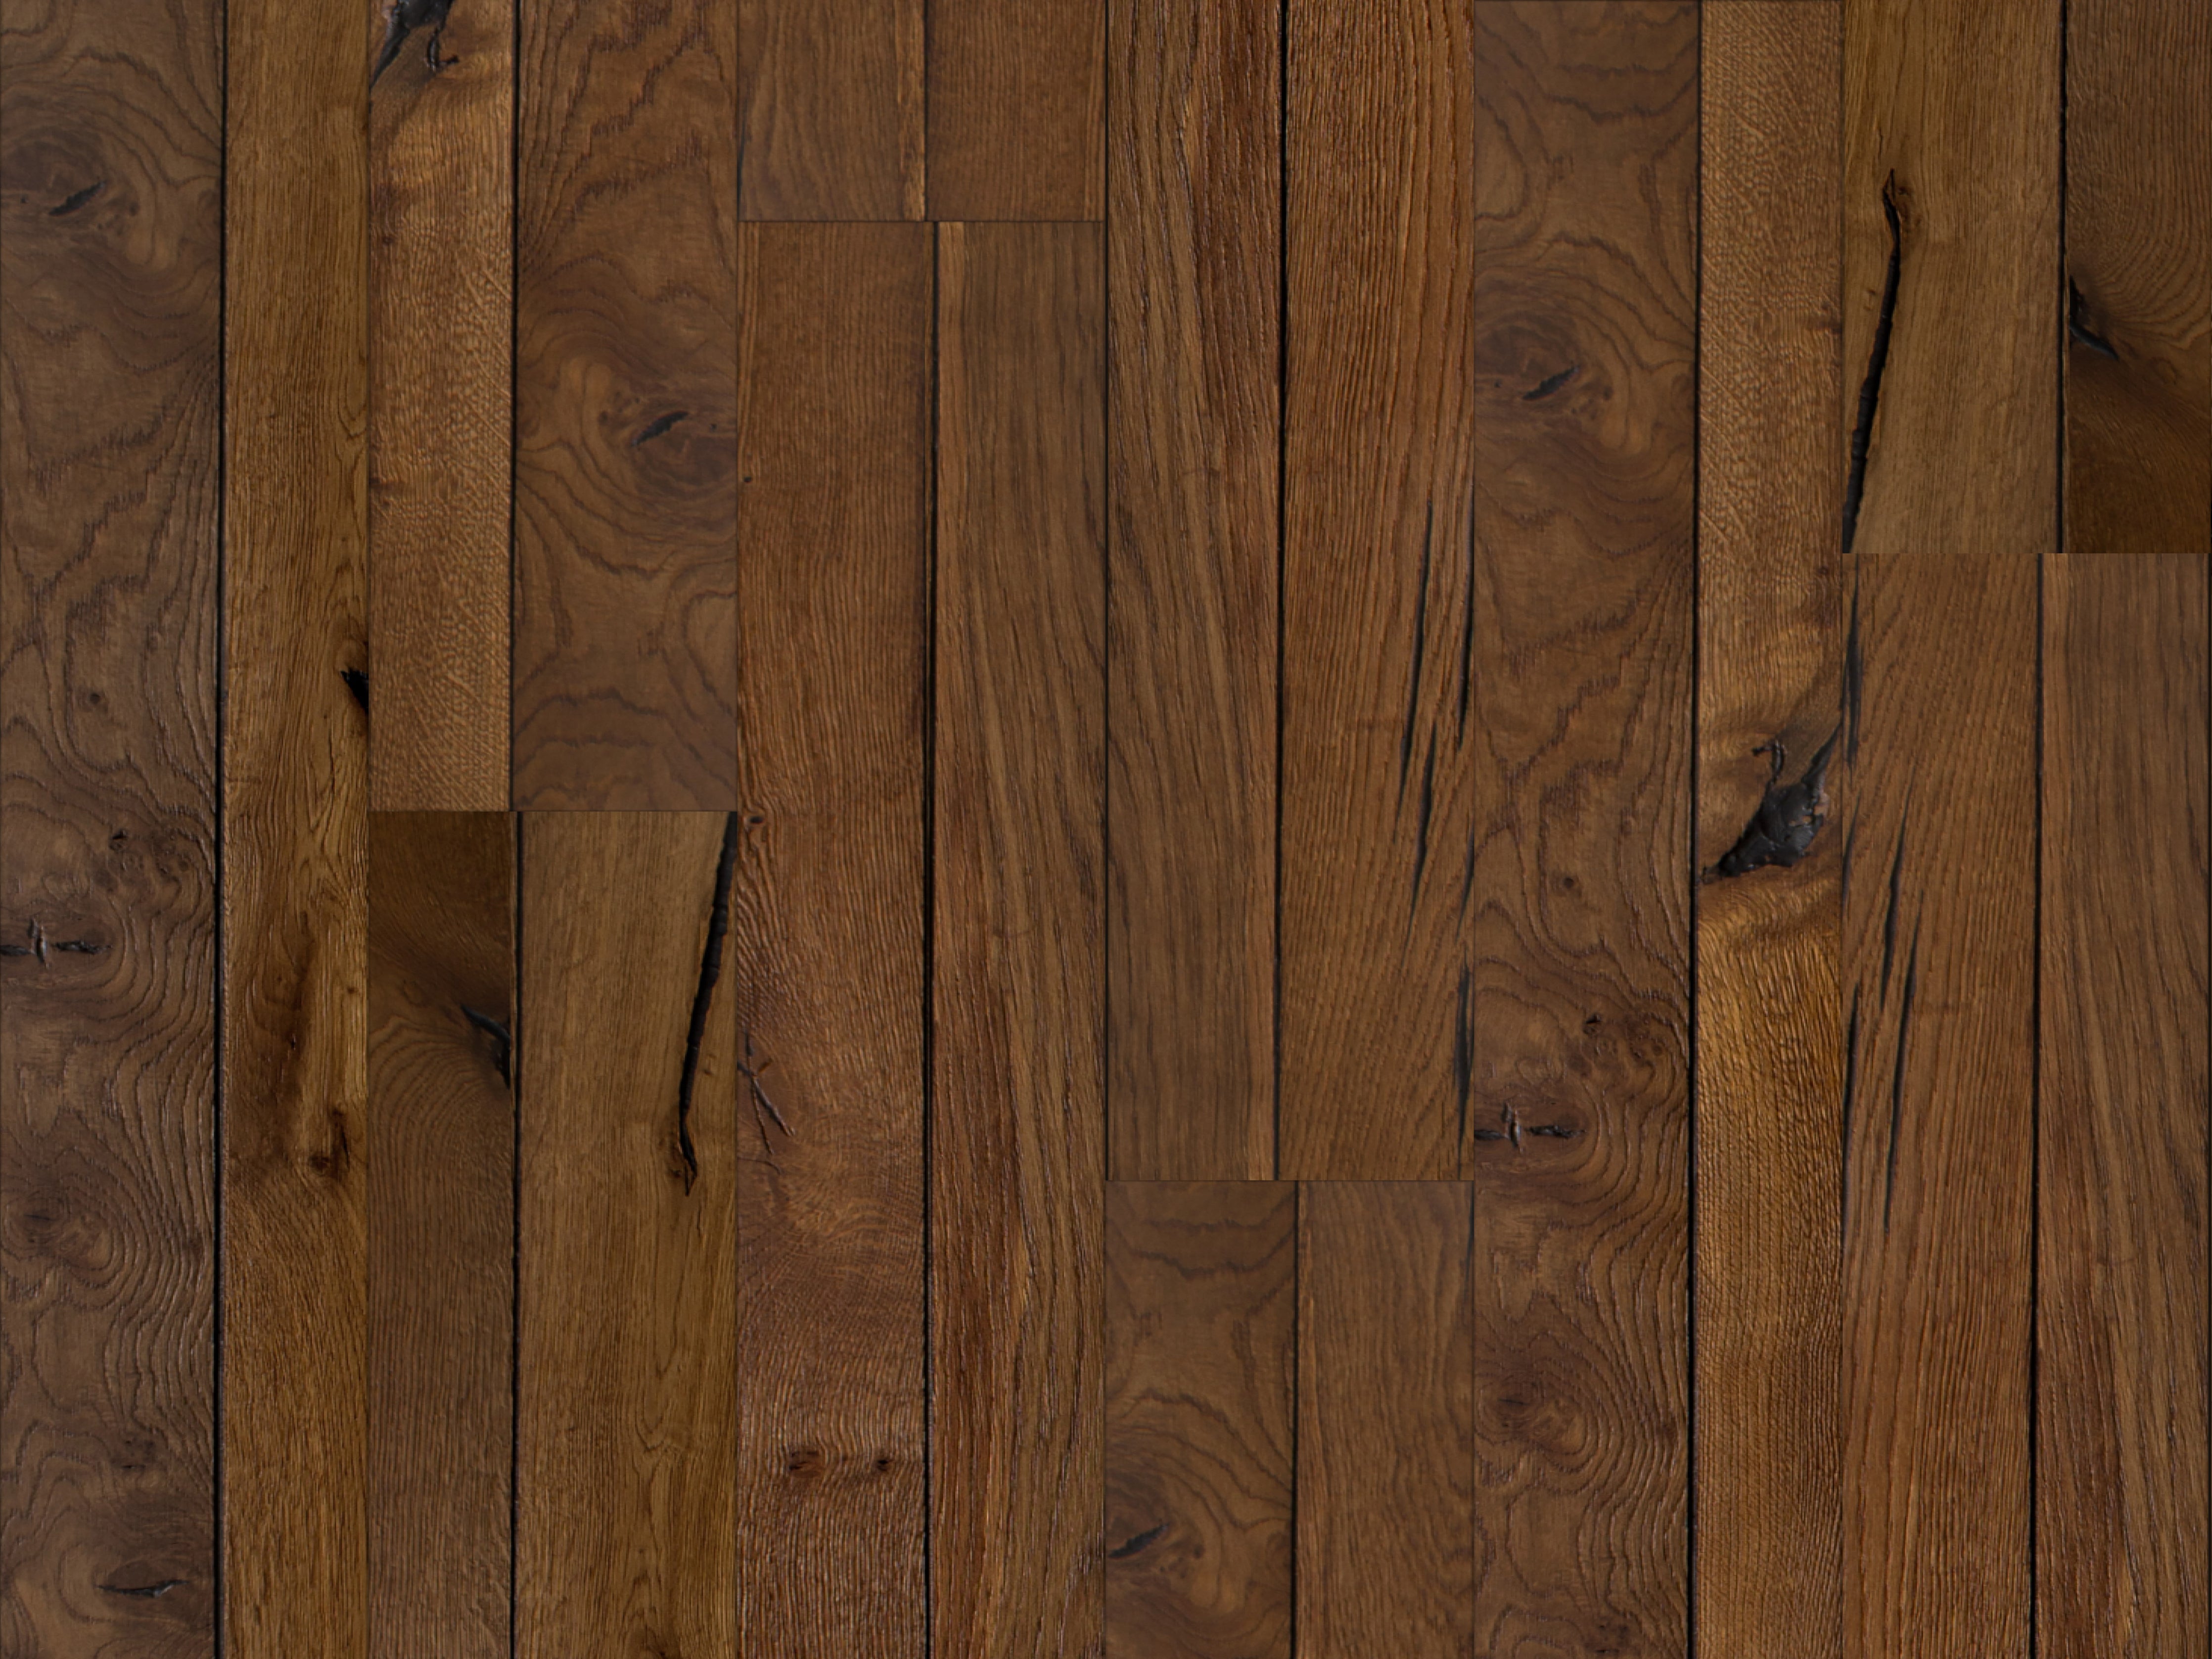 duchateau signature heritage timber trestle european oak engineered hardnatural wood floor hard wax oil finish for interior use distributed by surface group international